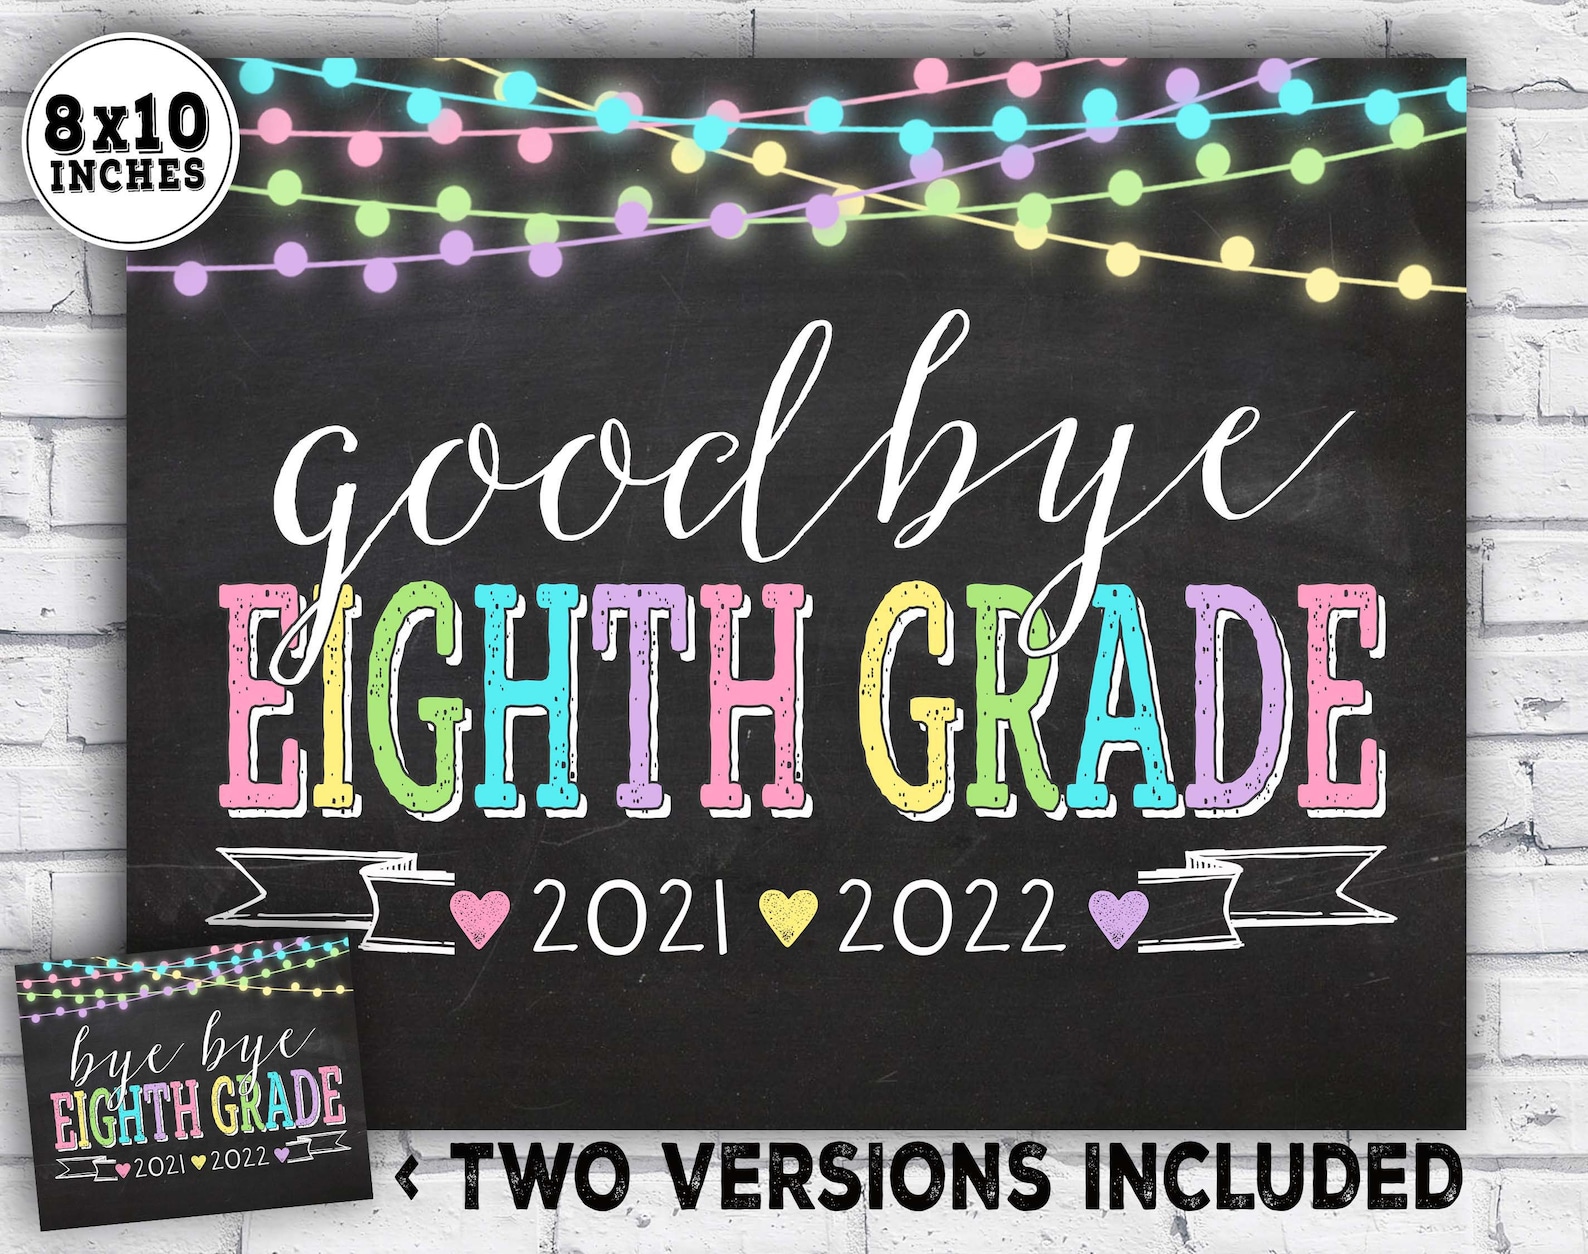 last-day-of-8th-grade-sign-last-day-of-school-sign-2021-2022-etsy